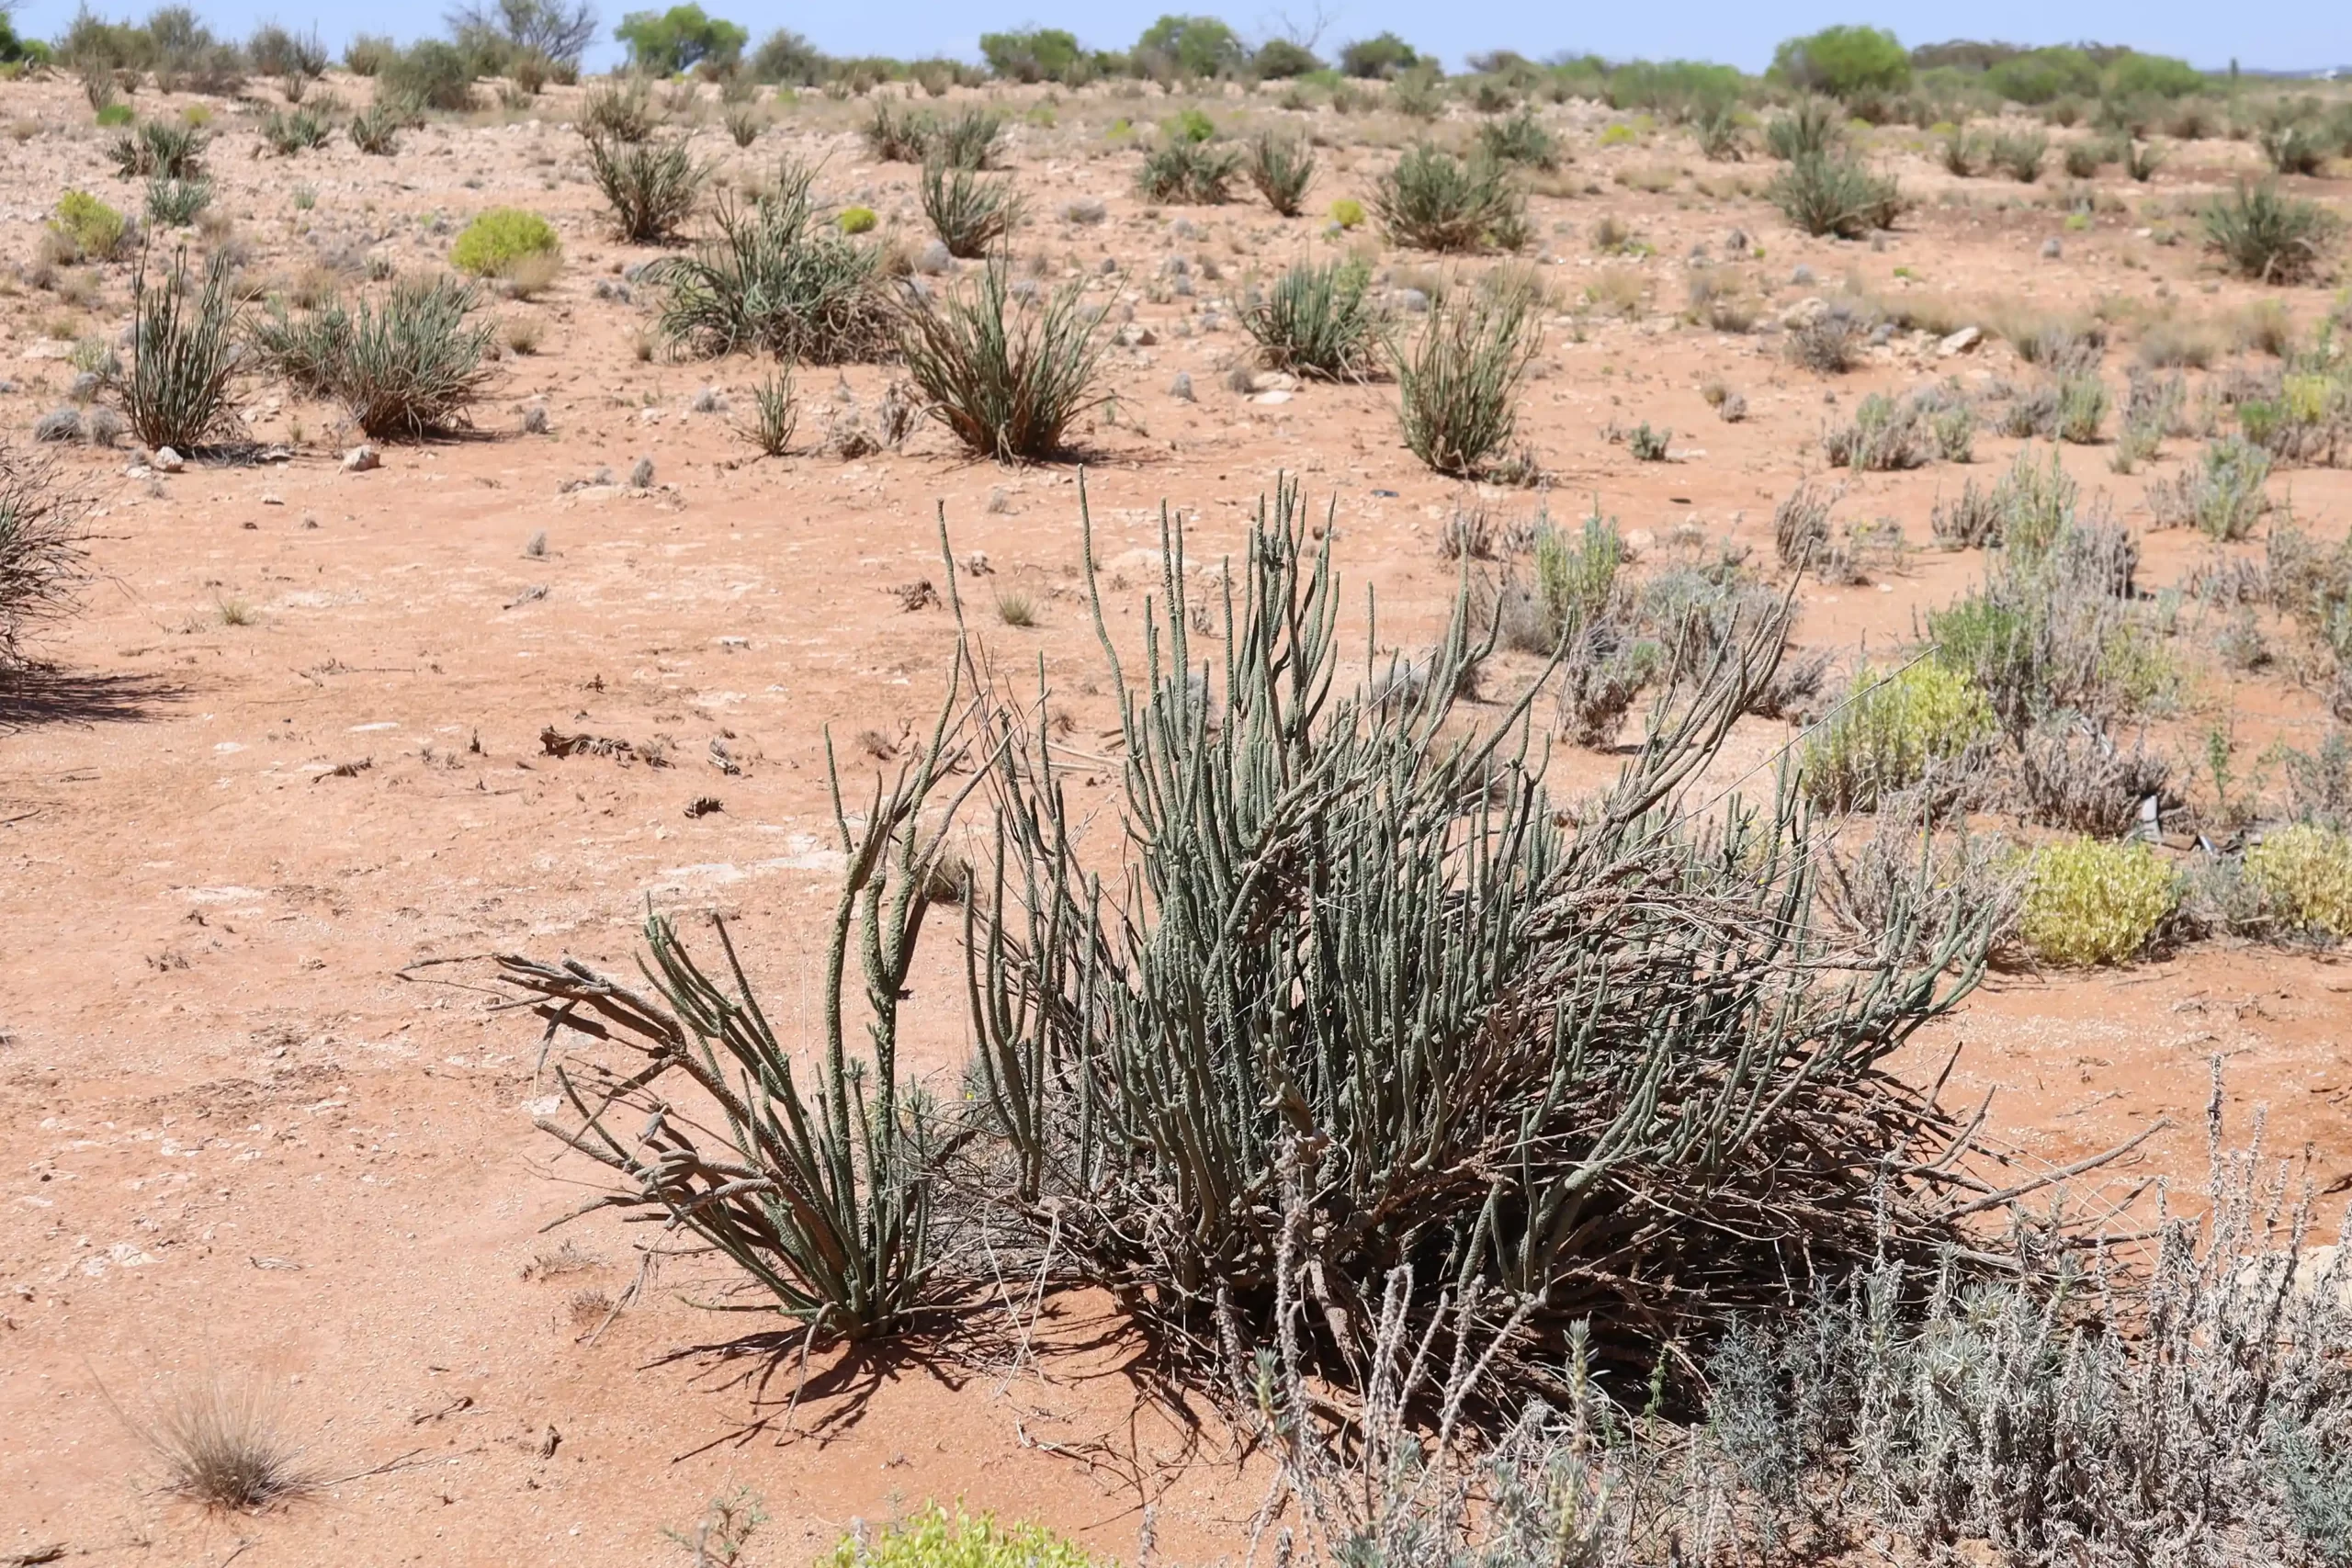 Dunna Dunna or Lawrencia helmsii is a cactus-like shrub found in saline environments, near Kalgoorlie, West Australia